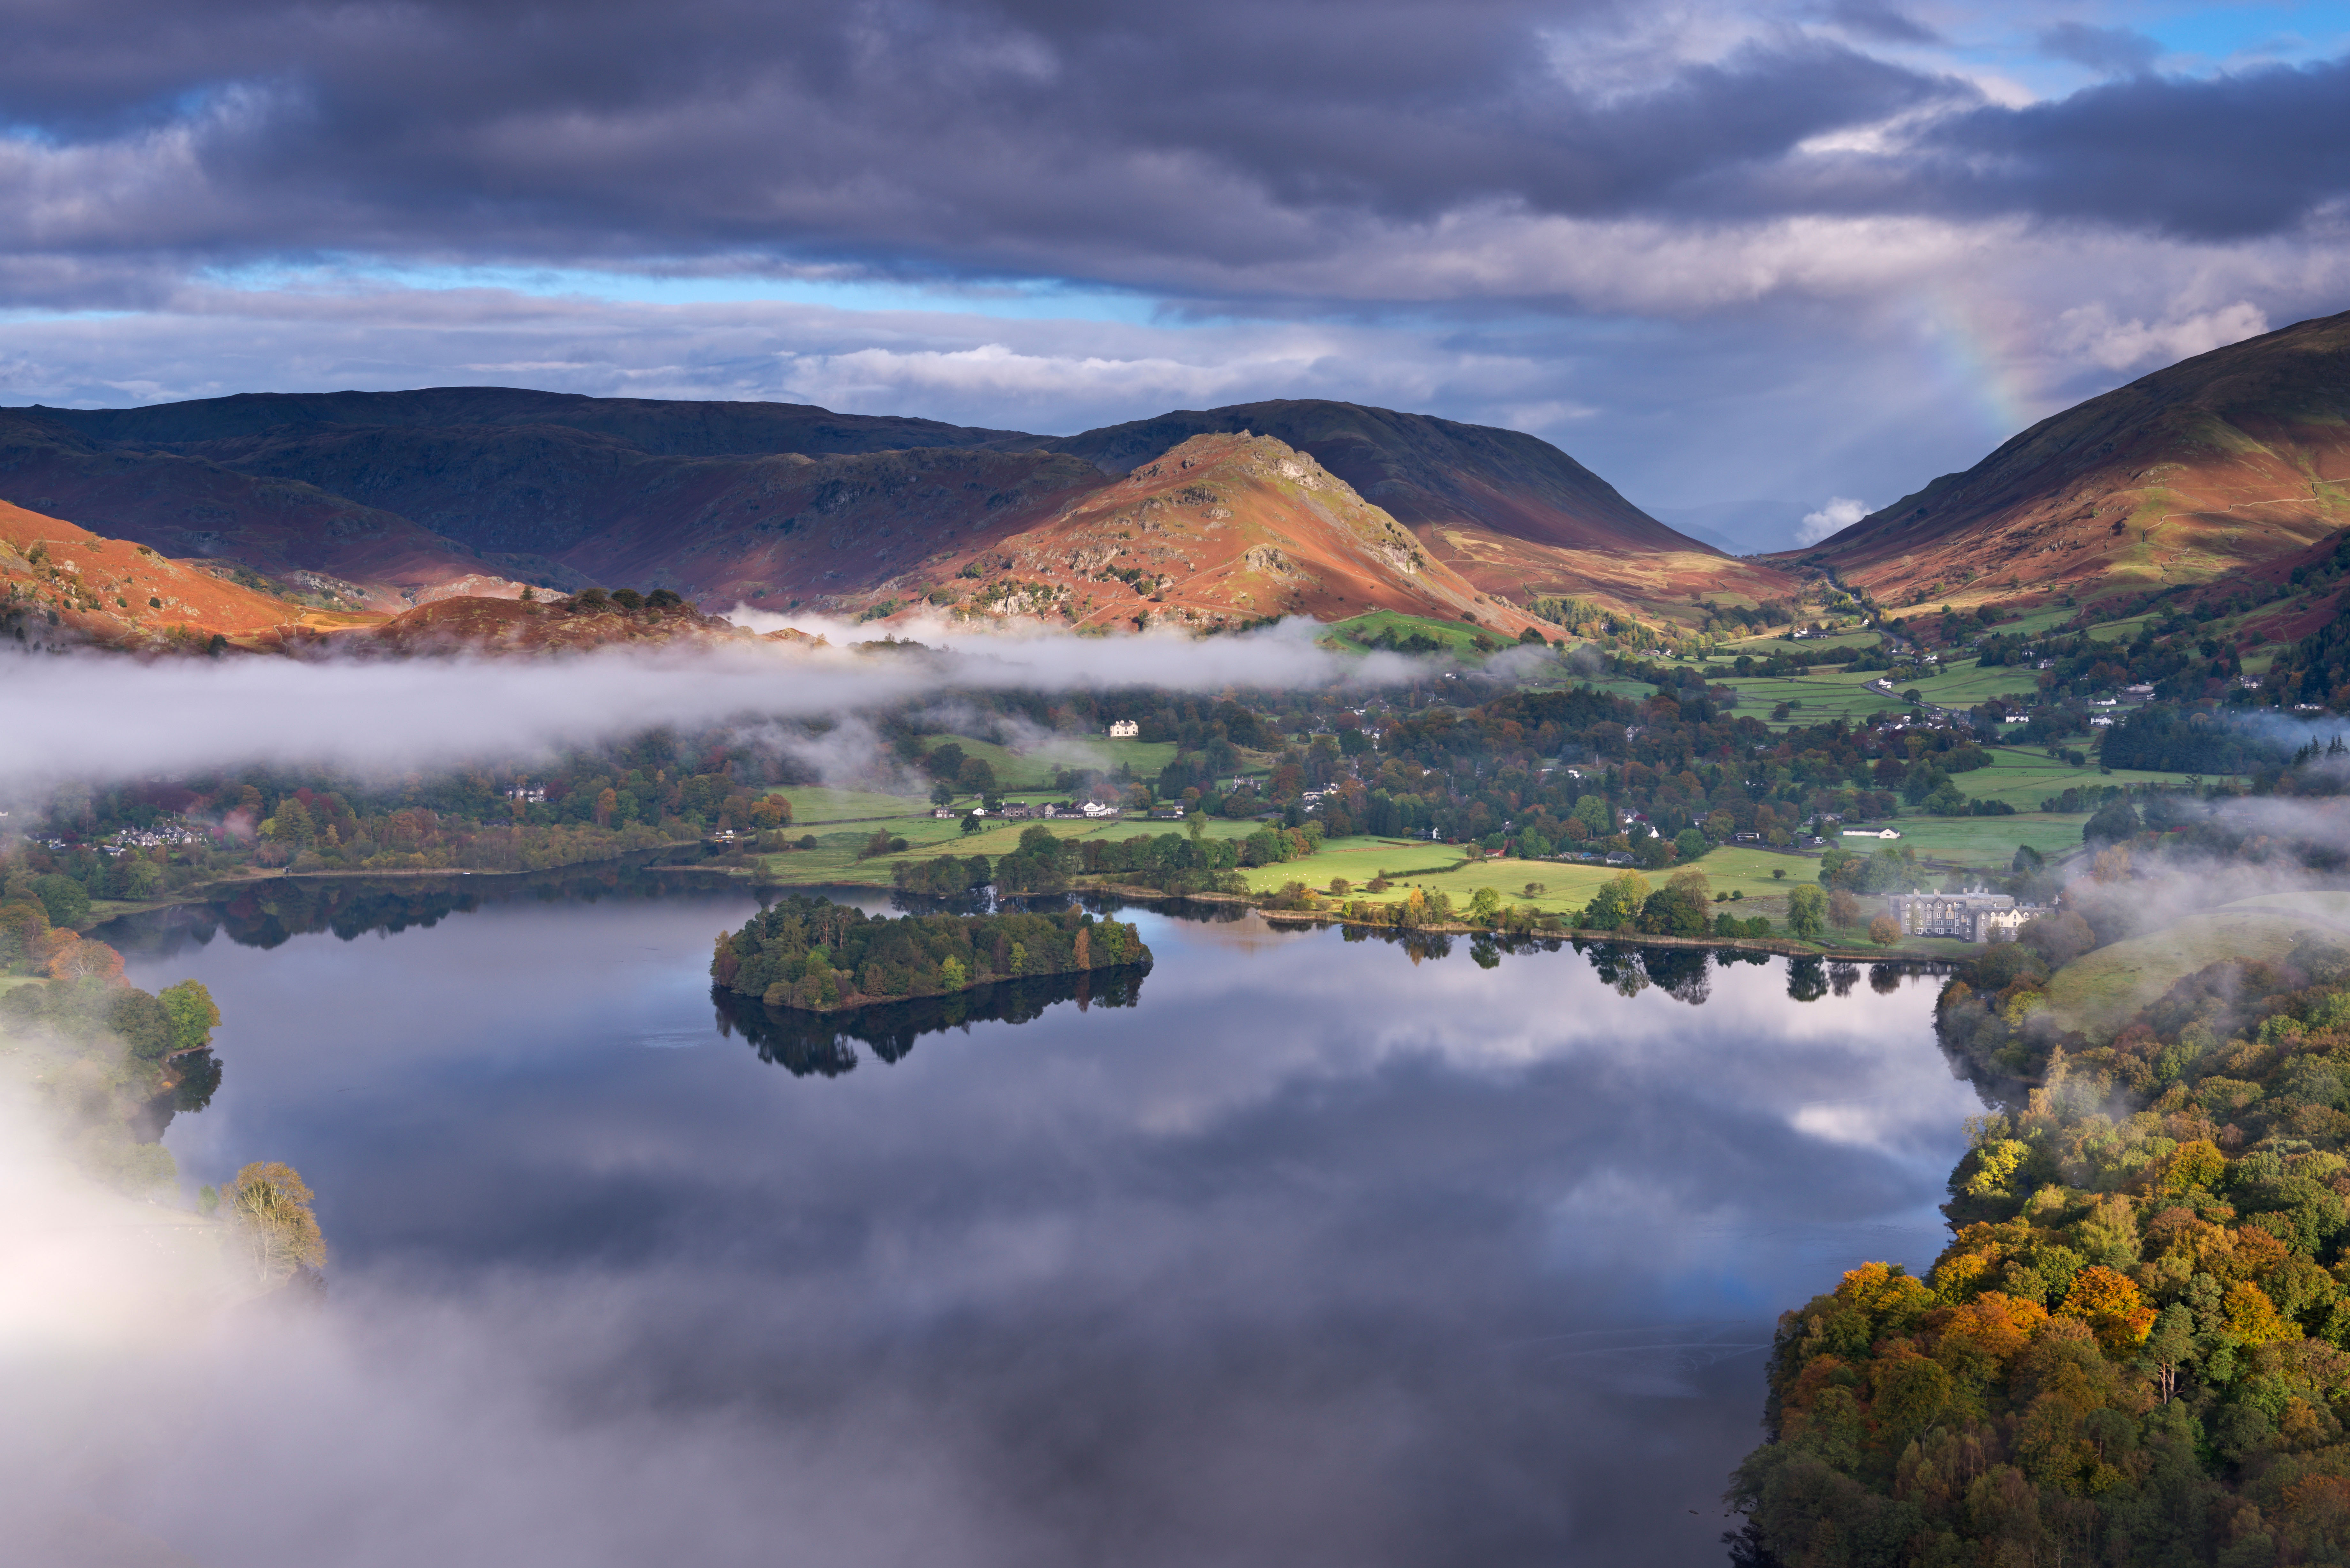 Discover 18 Of The Best Luxury Cottages The Lake District Has To Offer